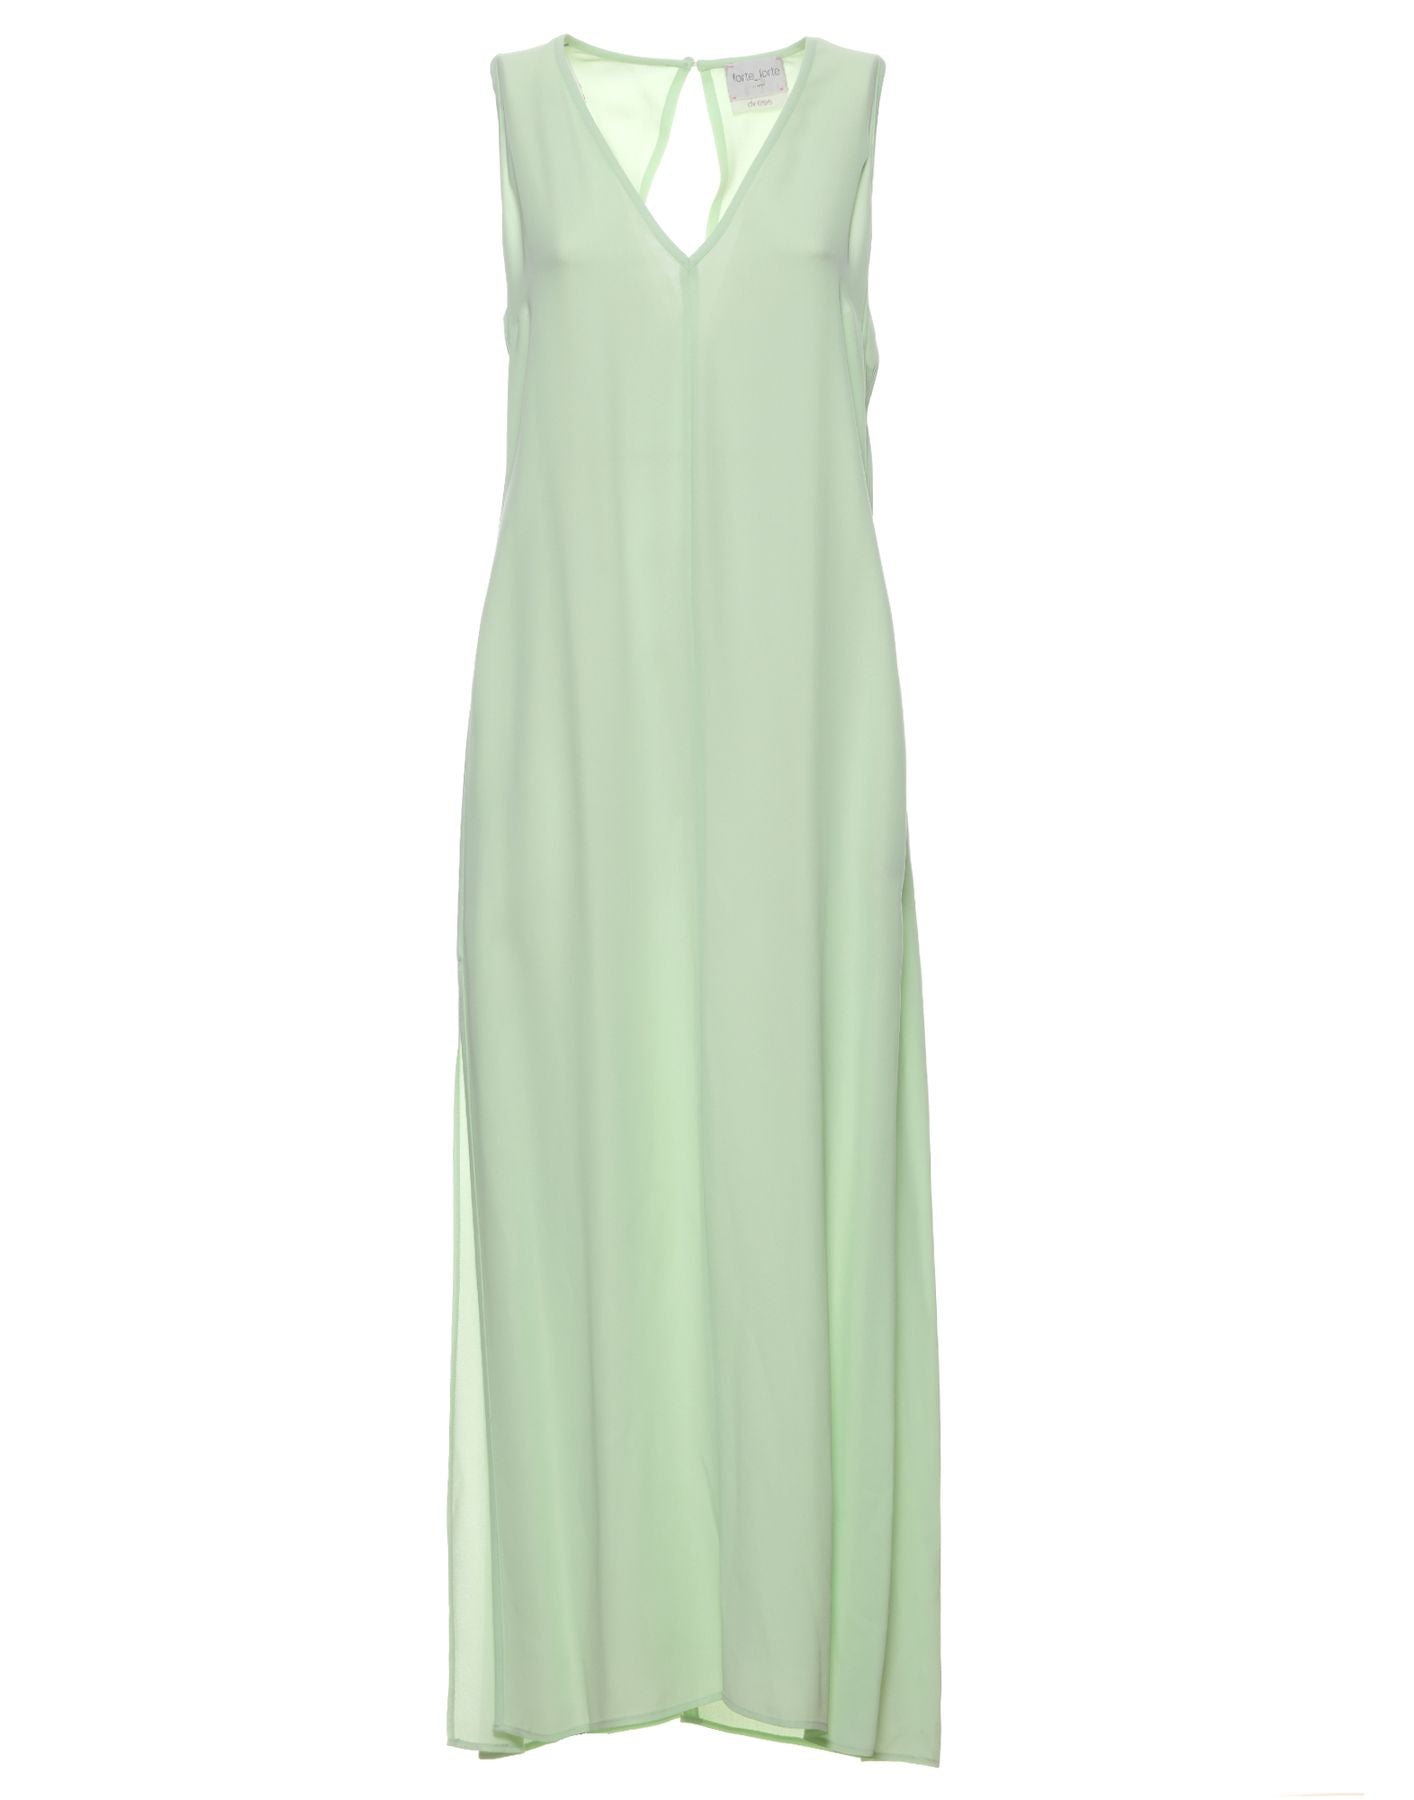 Dress for woman 12061 MY DRESS ICE LIME FORTE_FORTE